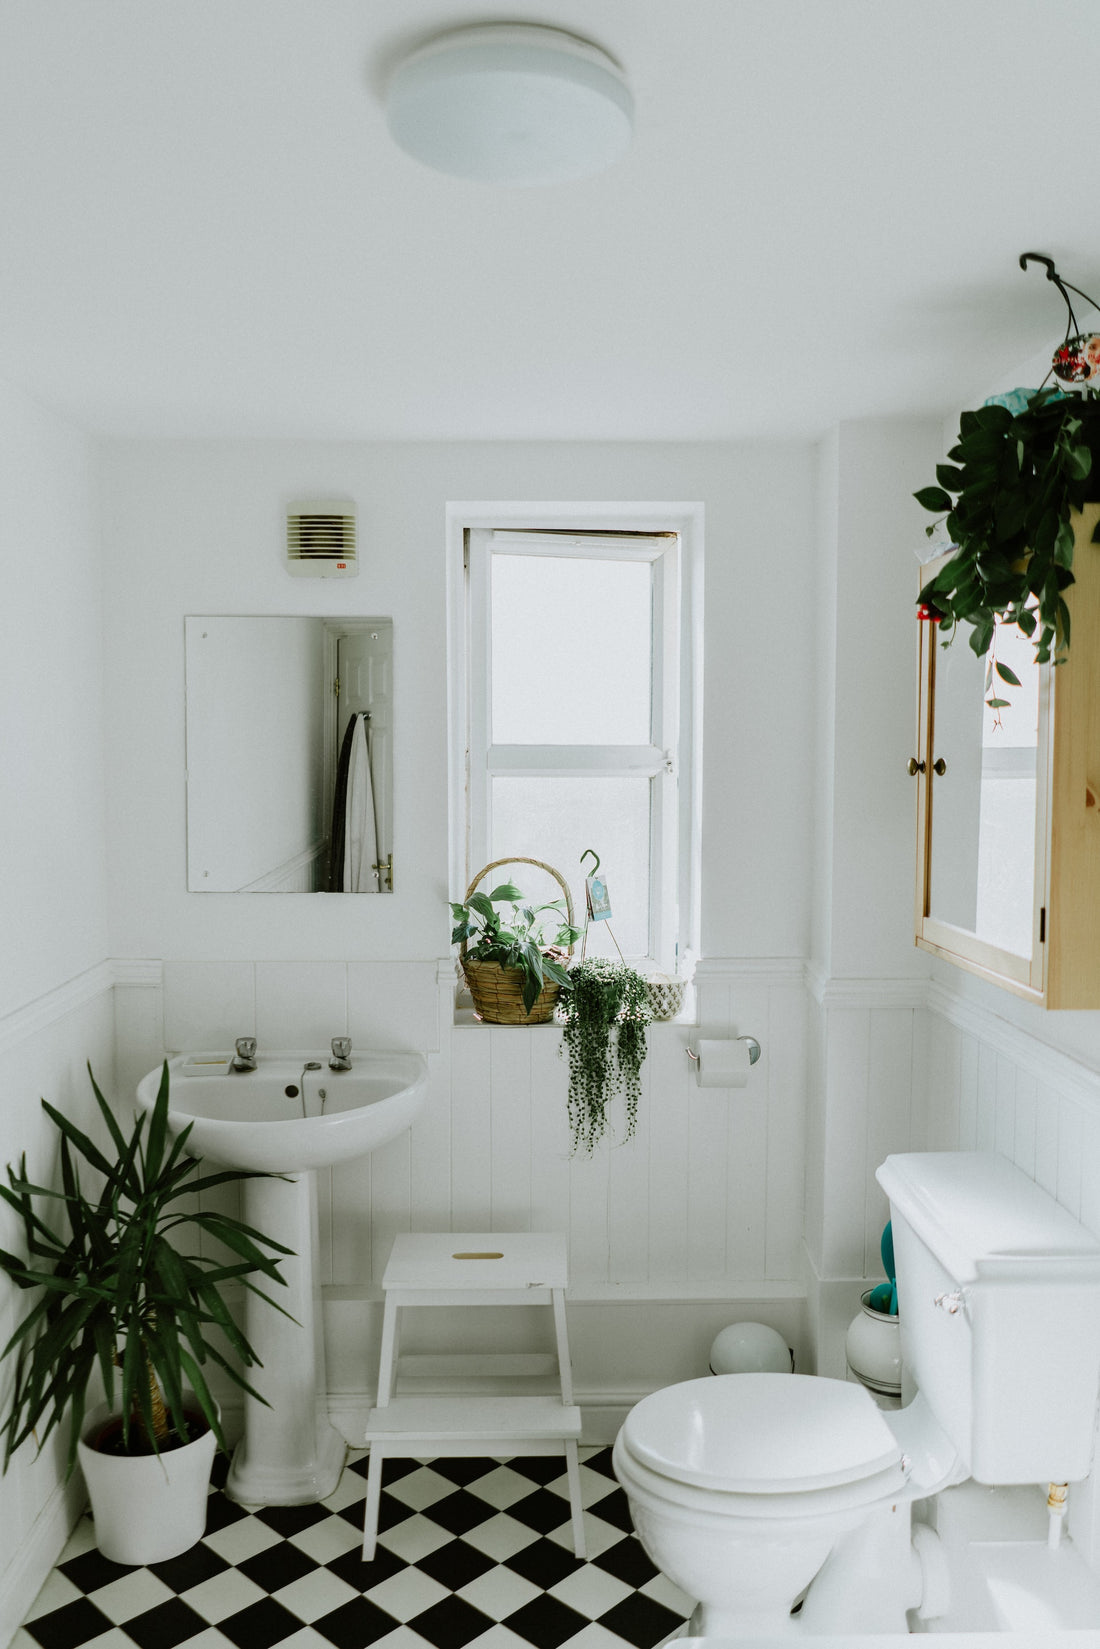 From Toilet to Tub, Go Green in your Bathroom